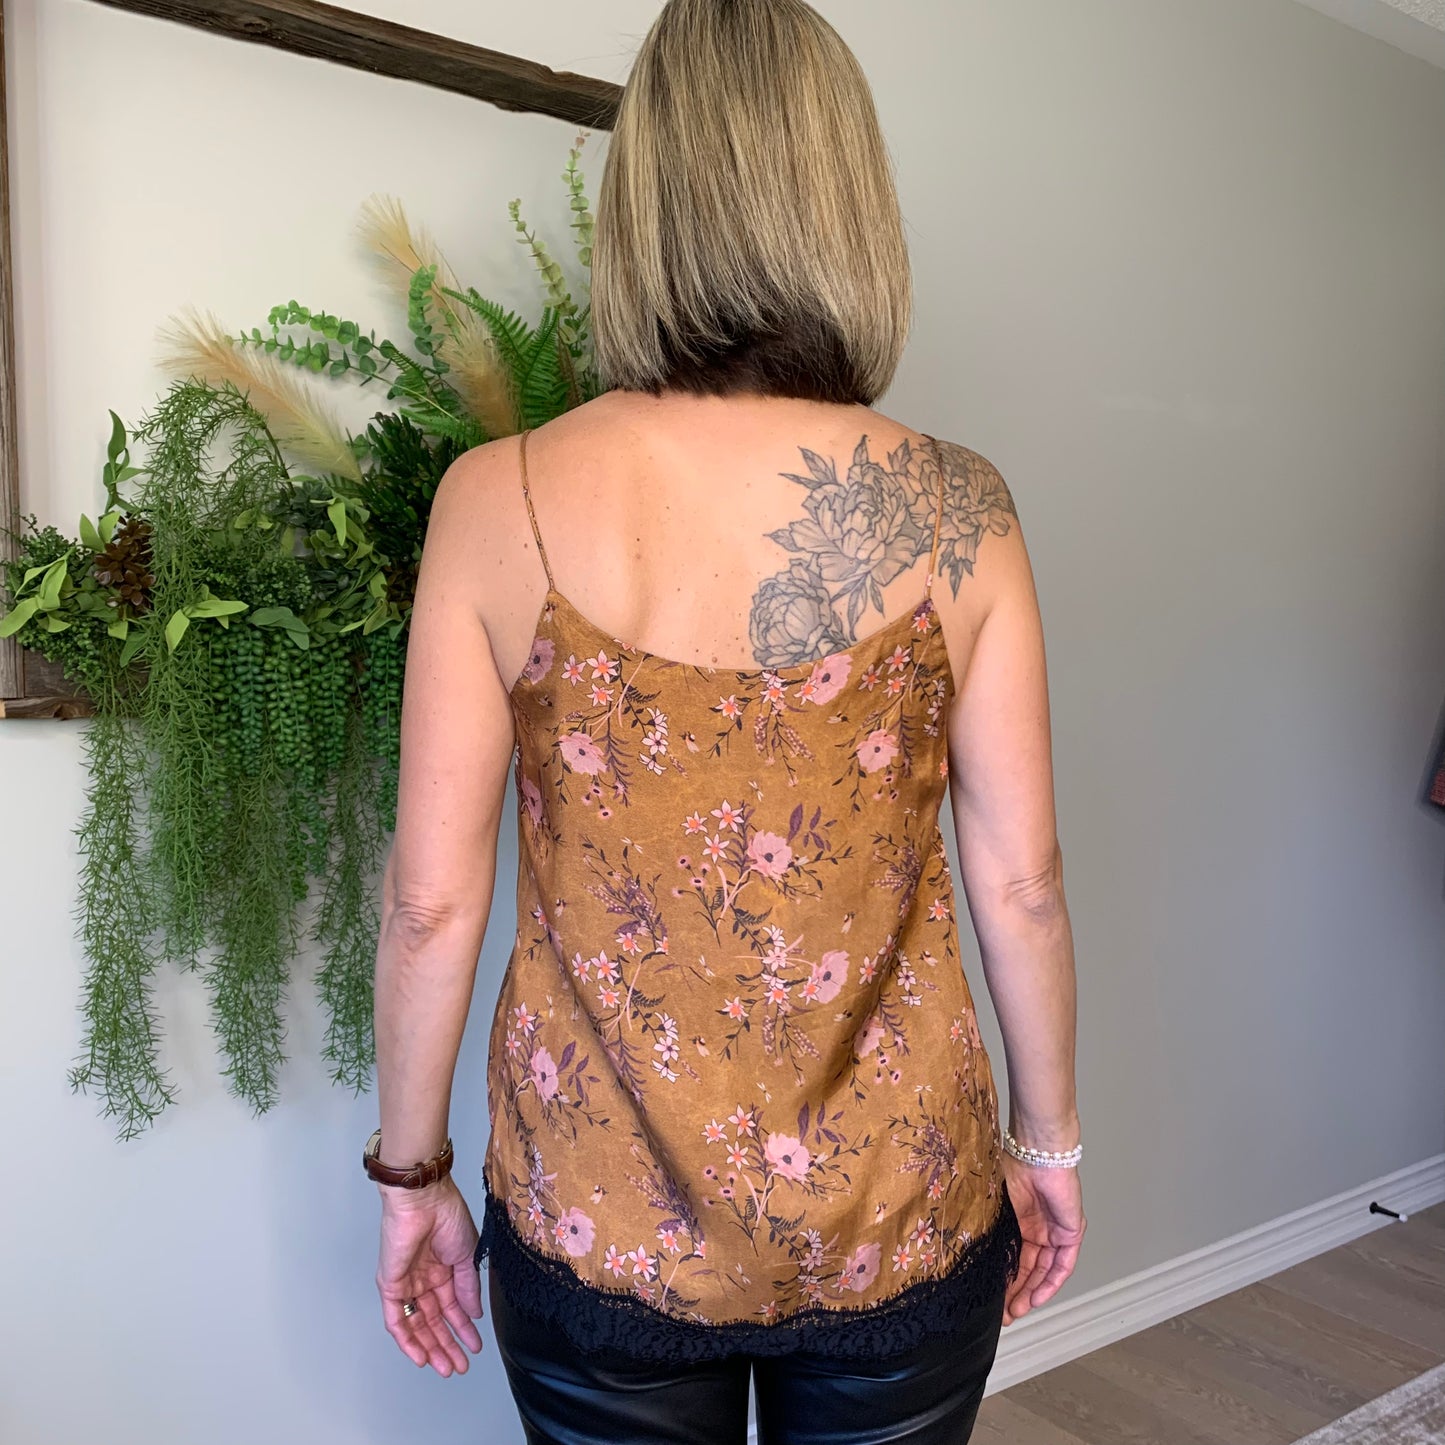 This Floral Camisole by the Korner presents a straight cut with black lace trimming around the hemline. An eye-catching, soft floral pattern in purple and pinks is set against a deep, velvety cinnamon hue, providing a luxuriously matte silk like finish. lemon cyprus boutique